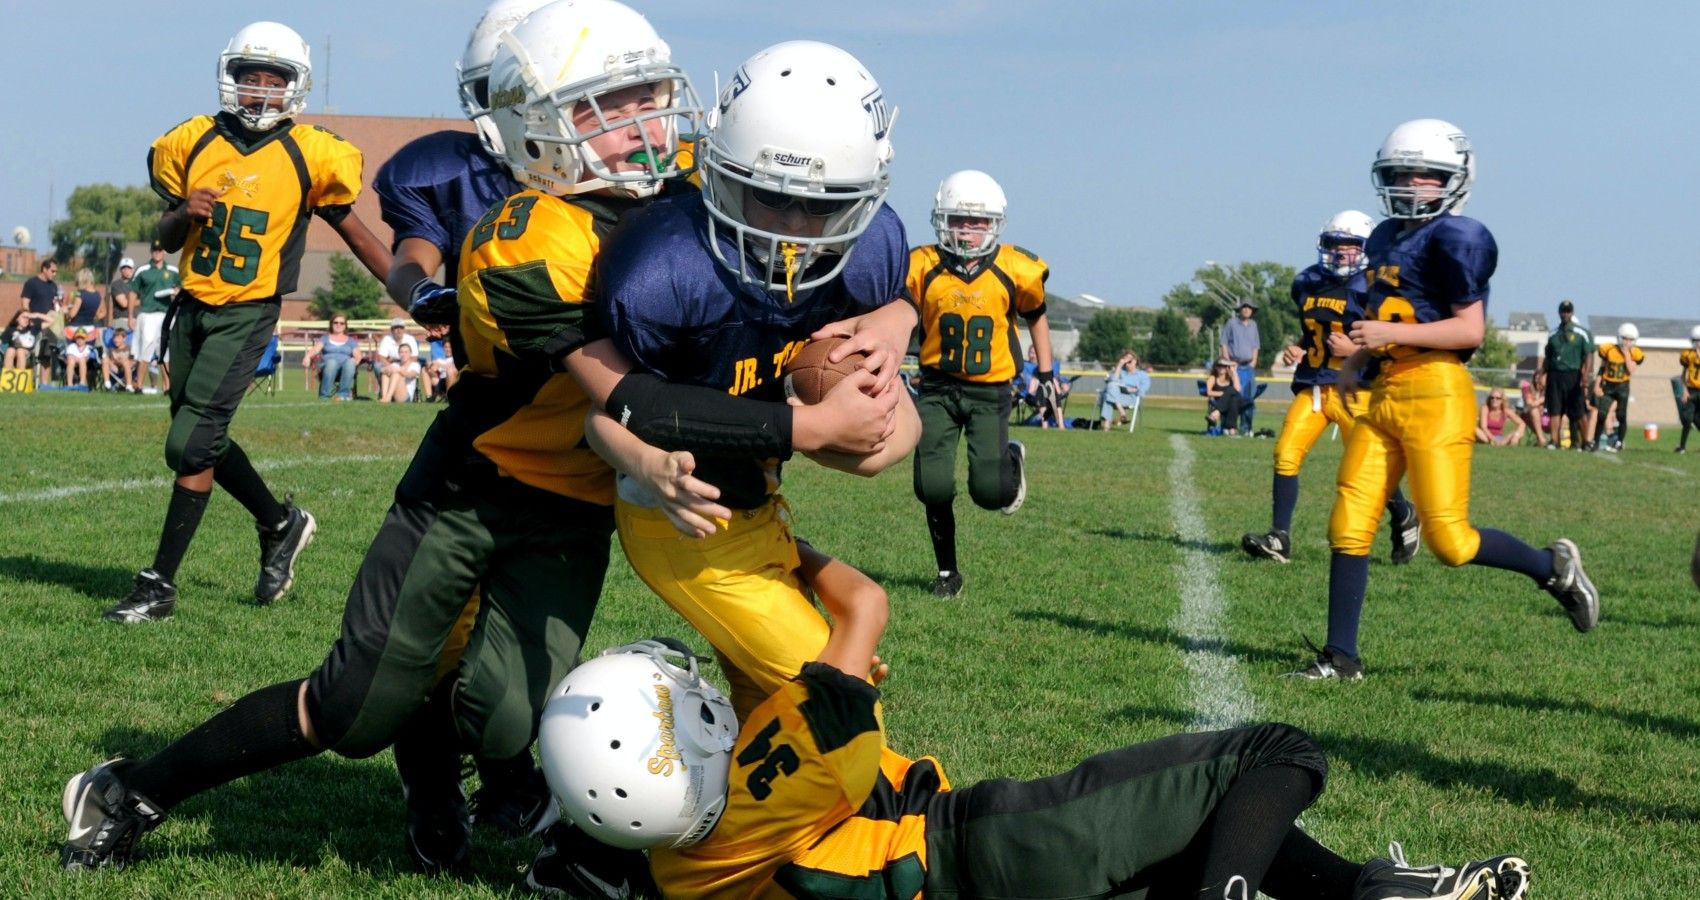 Kids In School Playing Tackle Football